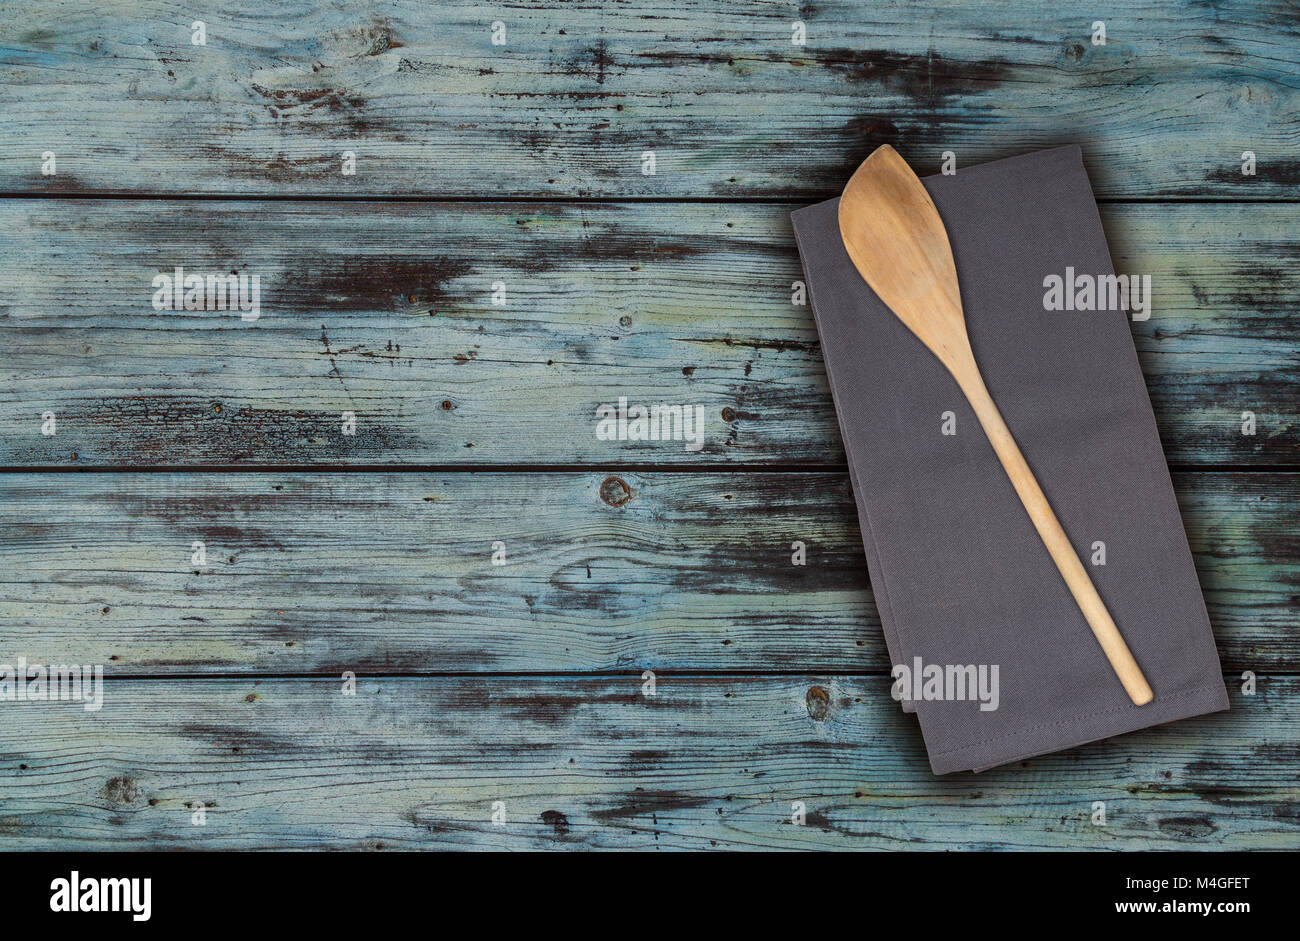 Wooden spoon and kitchen towel on turquoise vintage wood. Stock Photo